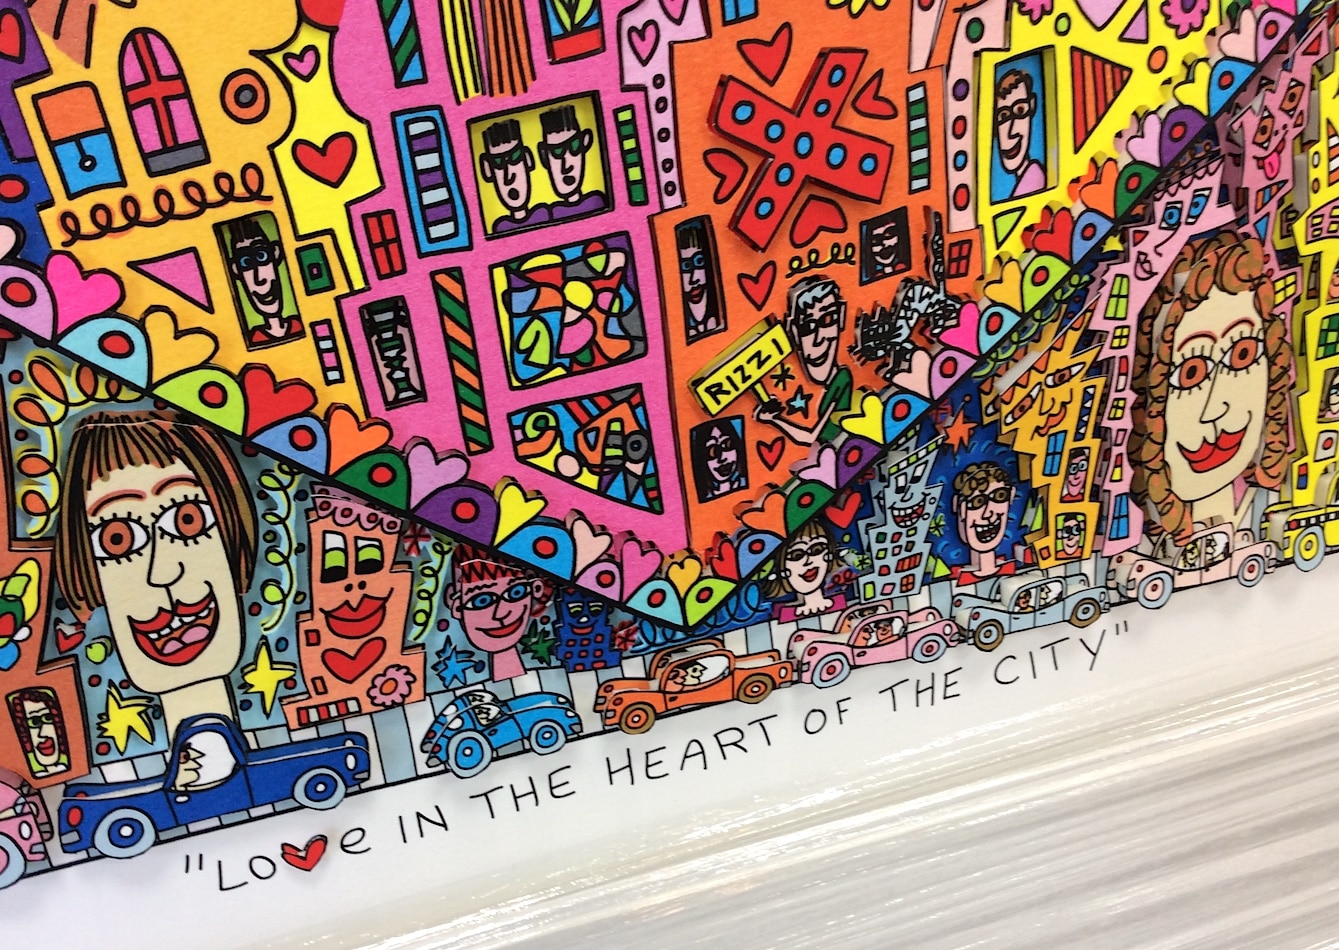 James-Rizzi-Love-in-the-heart-of-the-city-3D-Detail-Galerie-Hunold